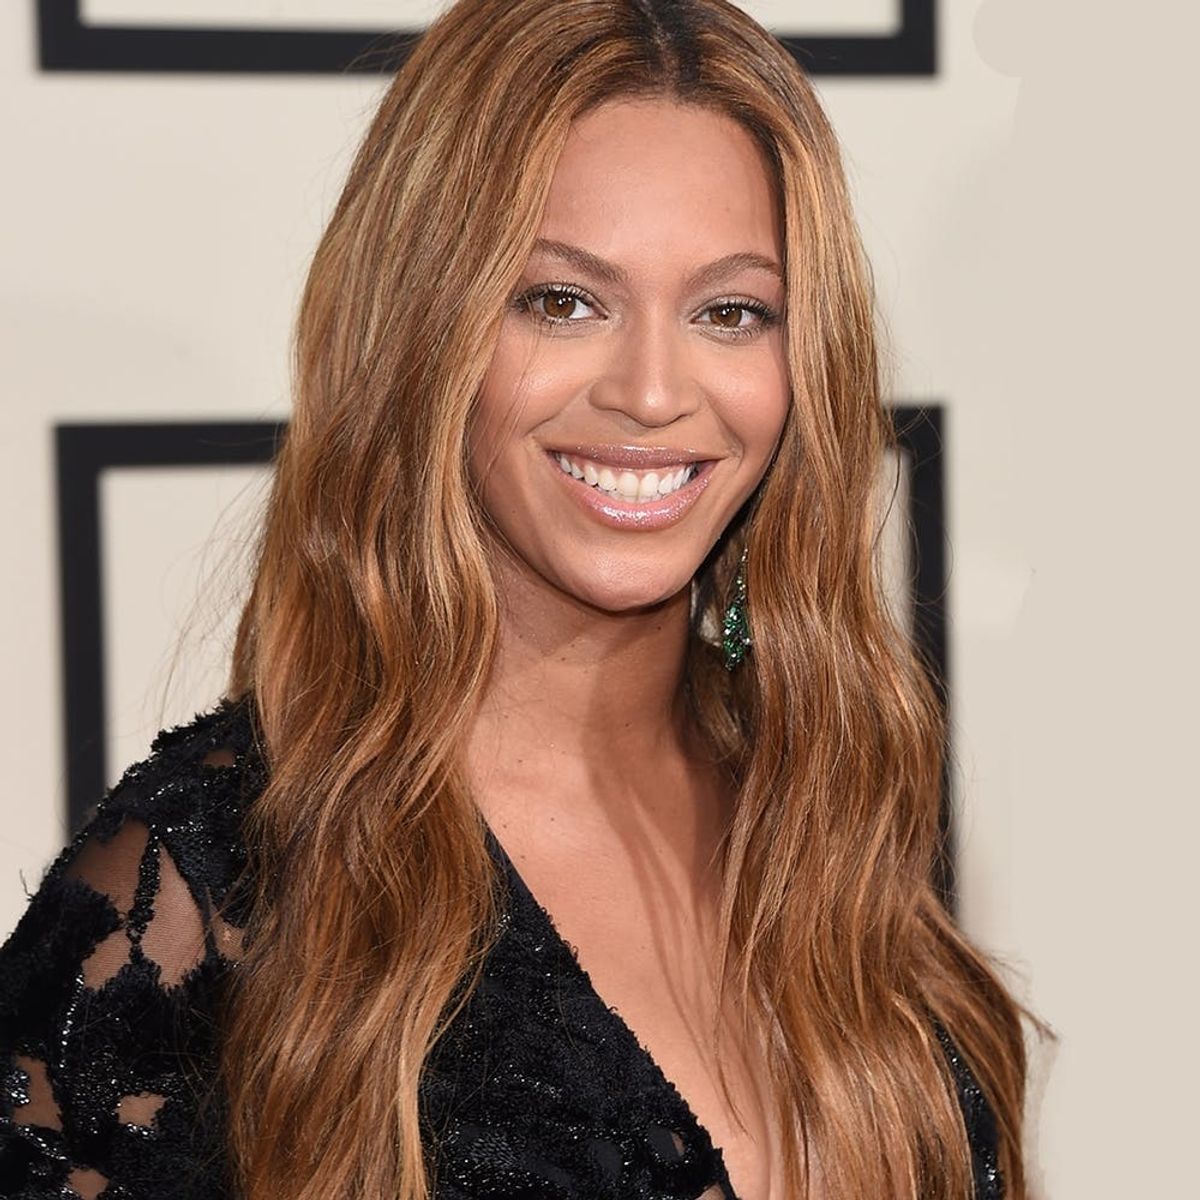 This Beyoncé News Will Inspire You to Learn a New Skill in 2016